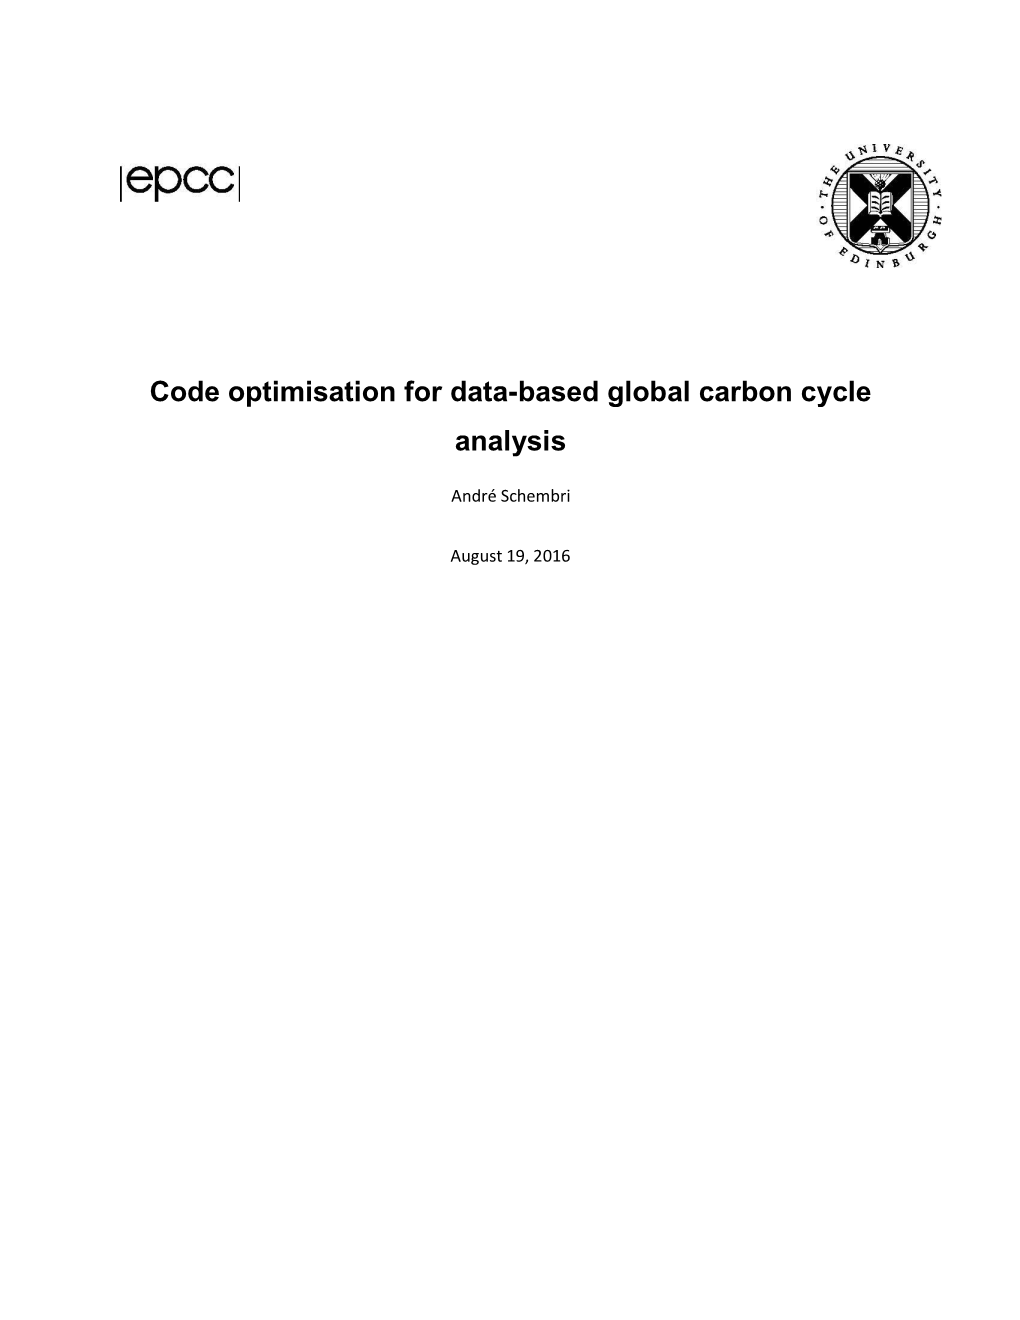 Code Optimisation for Data-Based Global Carbon Cycle Analysis